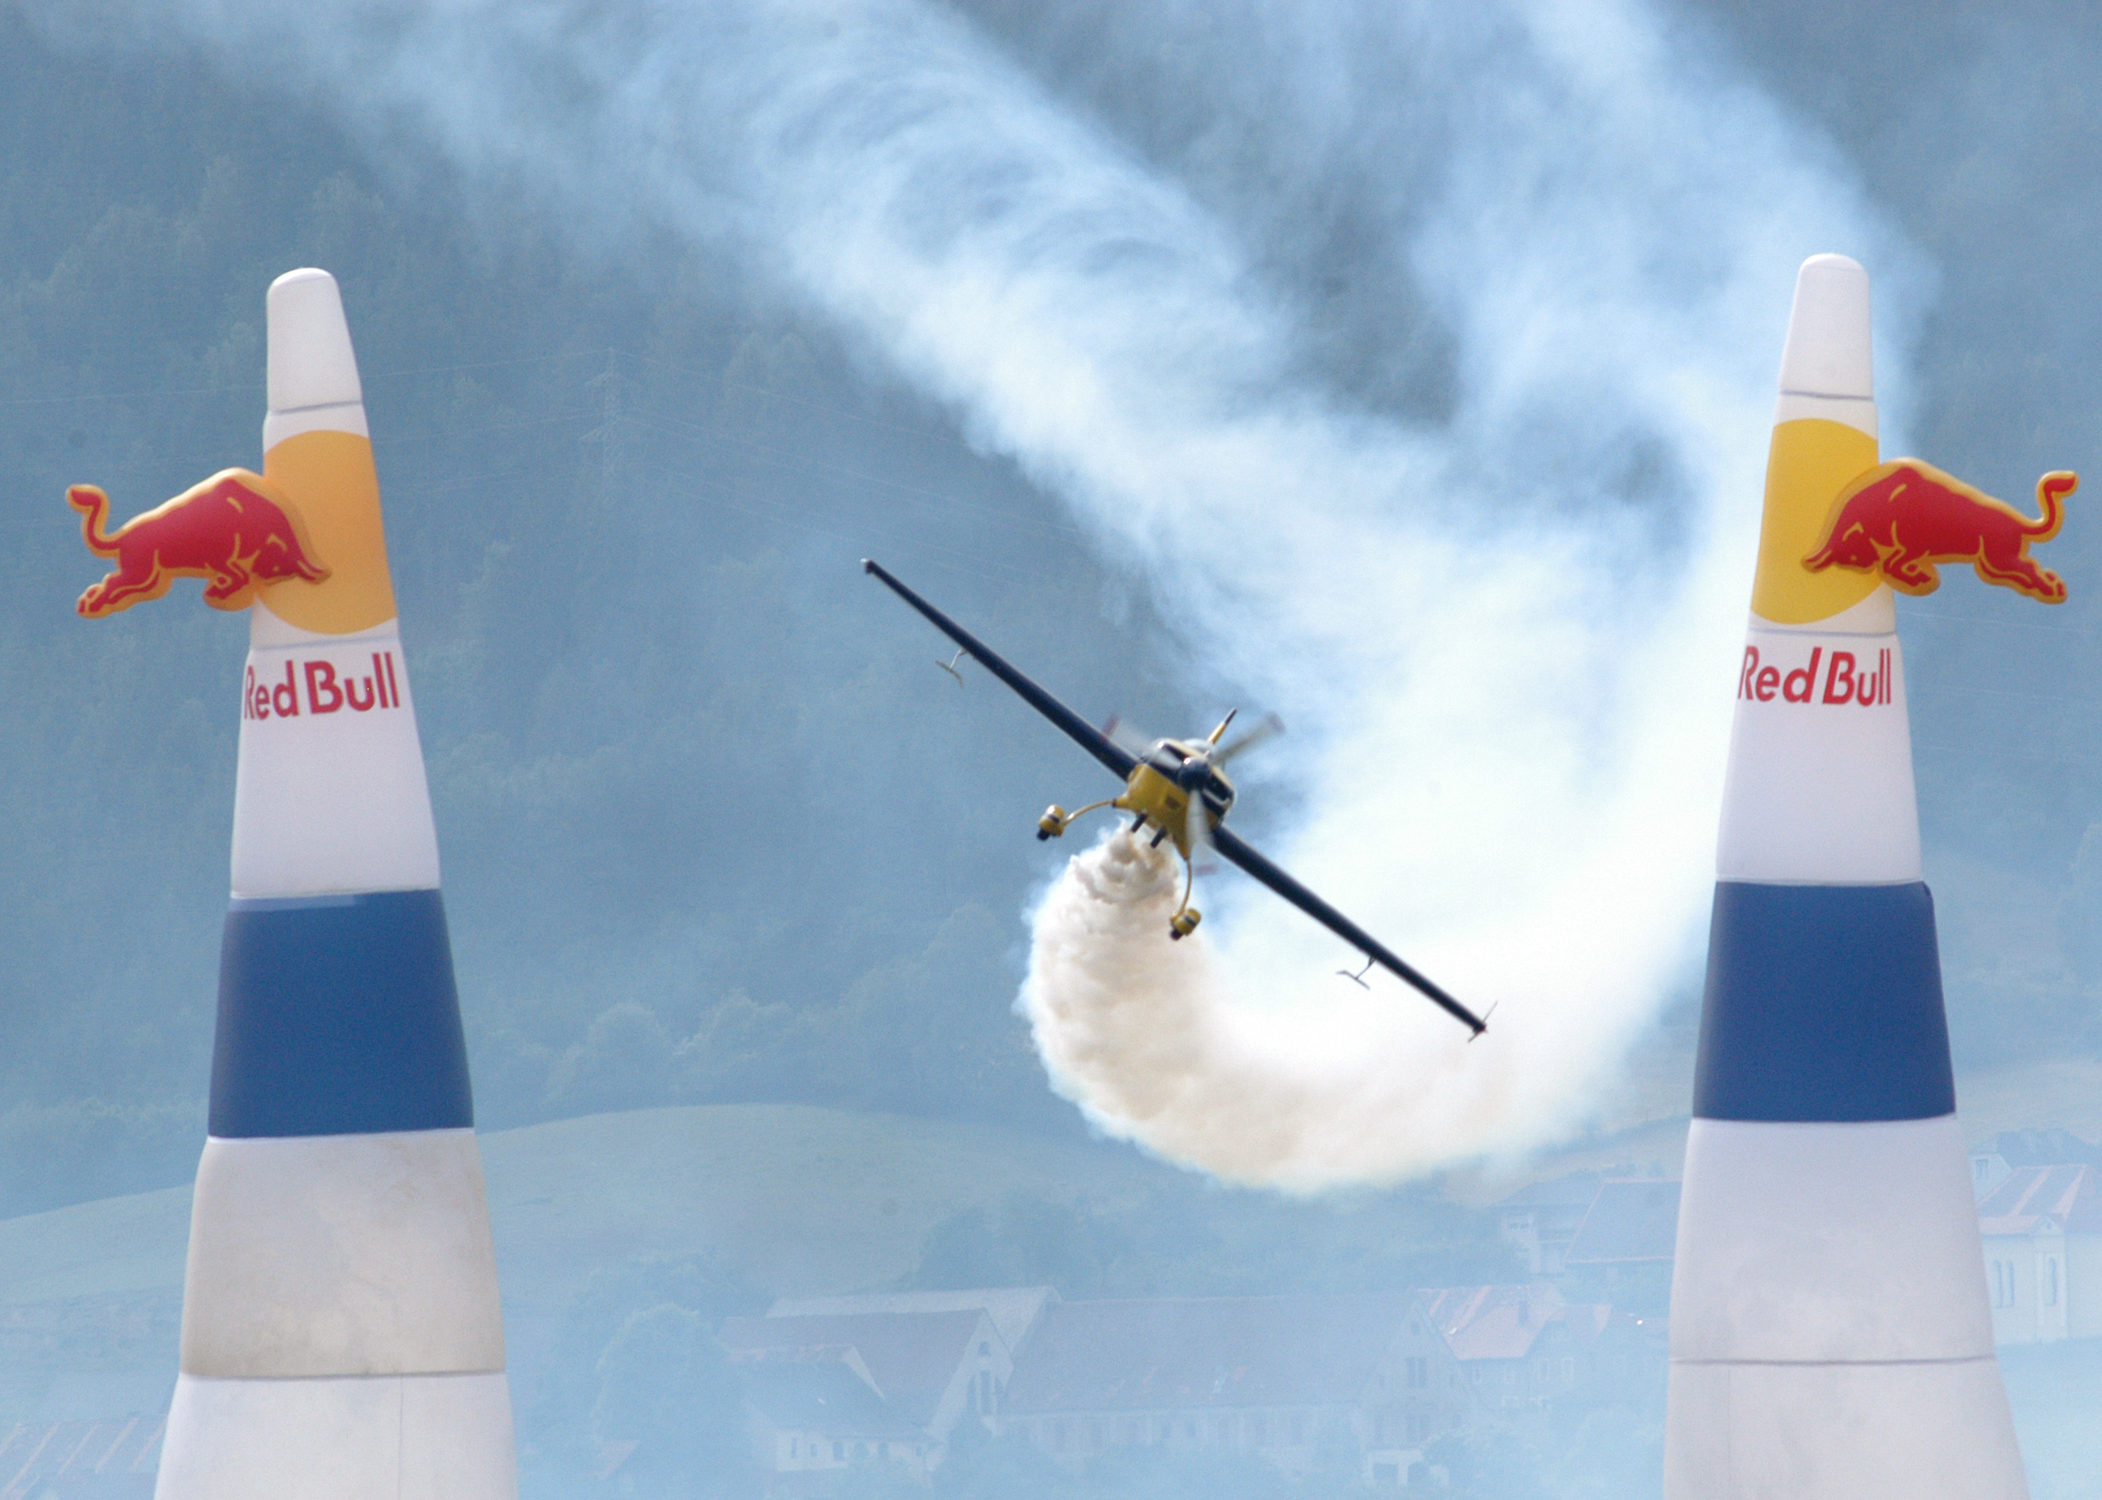 red bull air race, Airplane, Plane, Race, Racing, Red, Bull, Aircraft, Fs Wallpaper